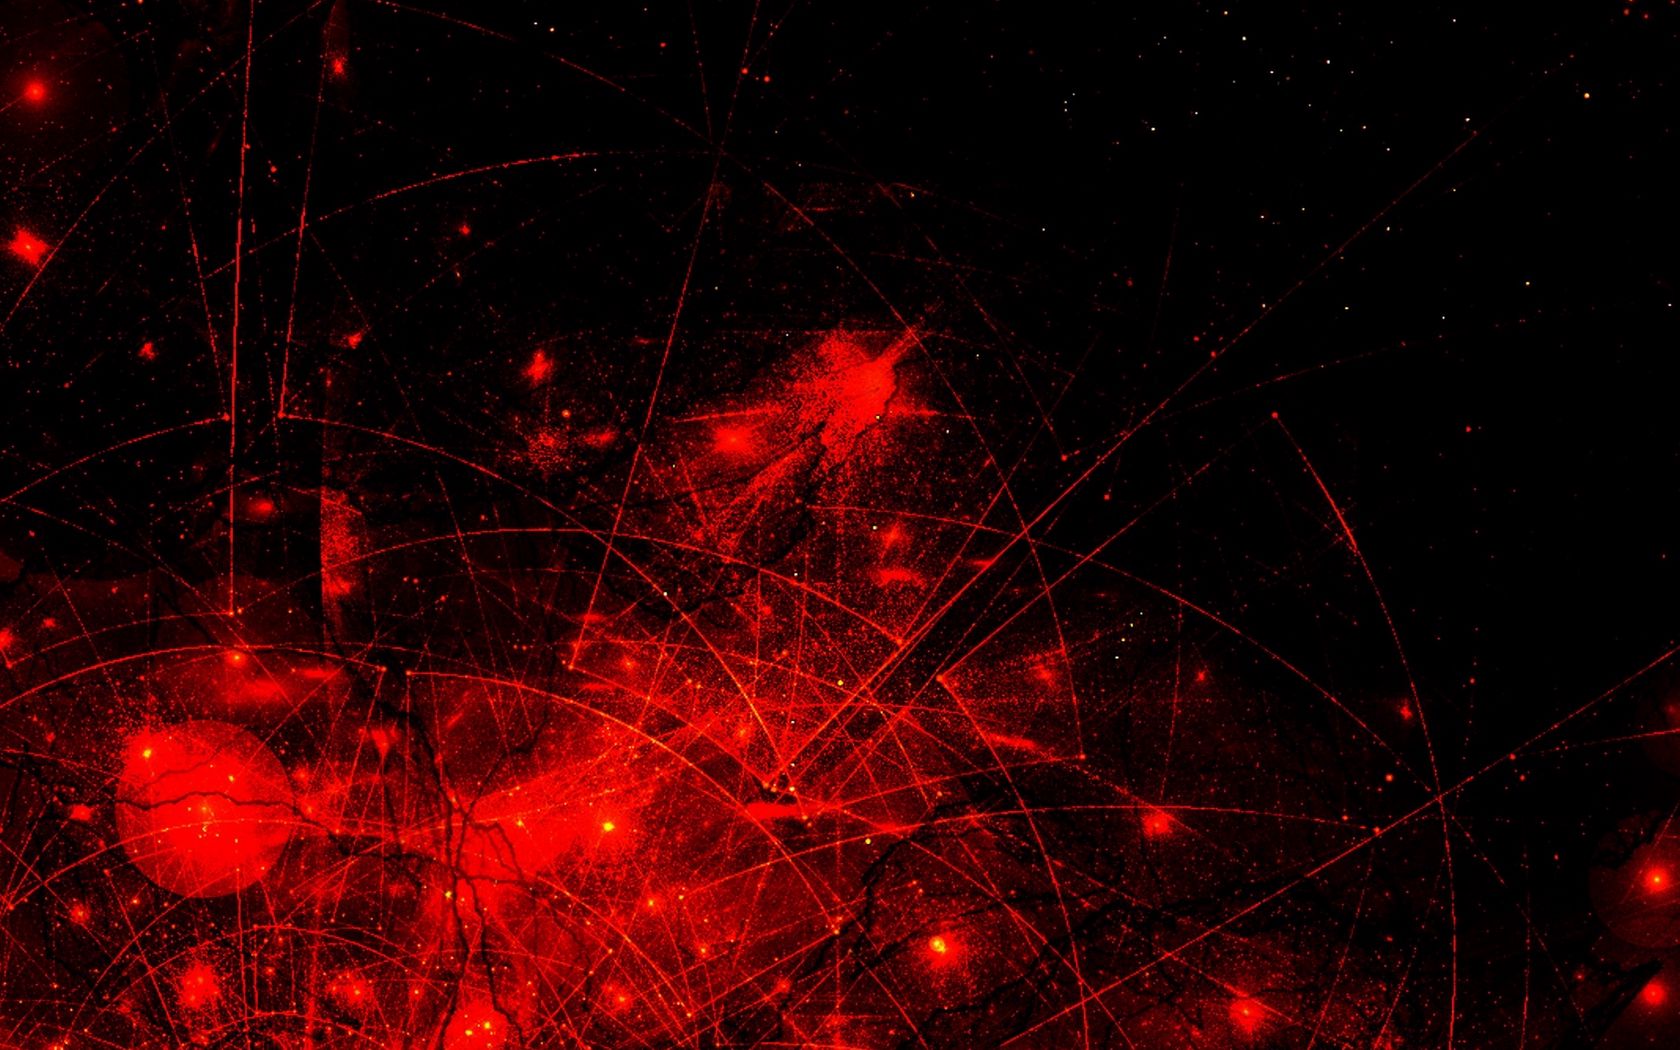 Download wallpaper 1680x1050 abstraction, red, black, universe, space, star, galaxy widescreen 16:10 HD background